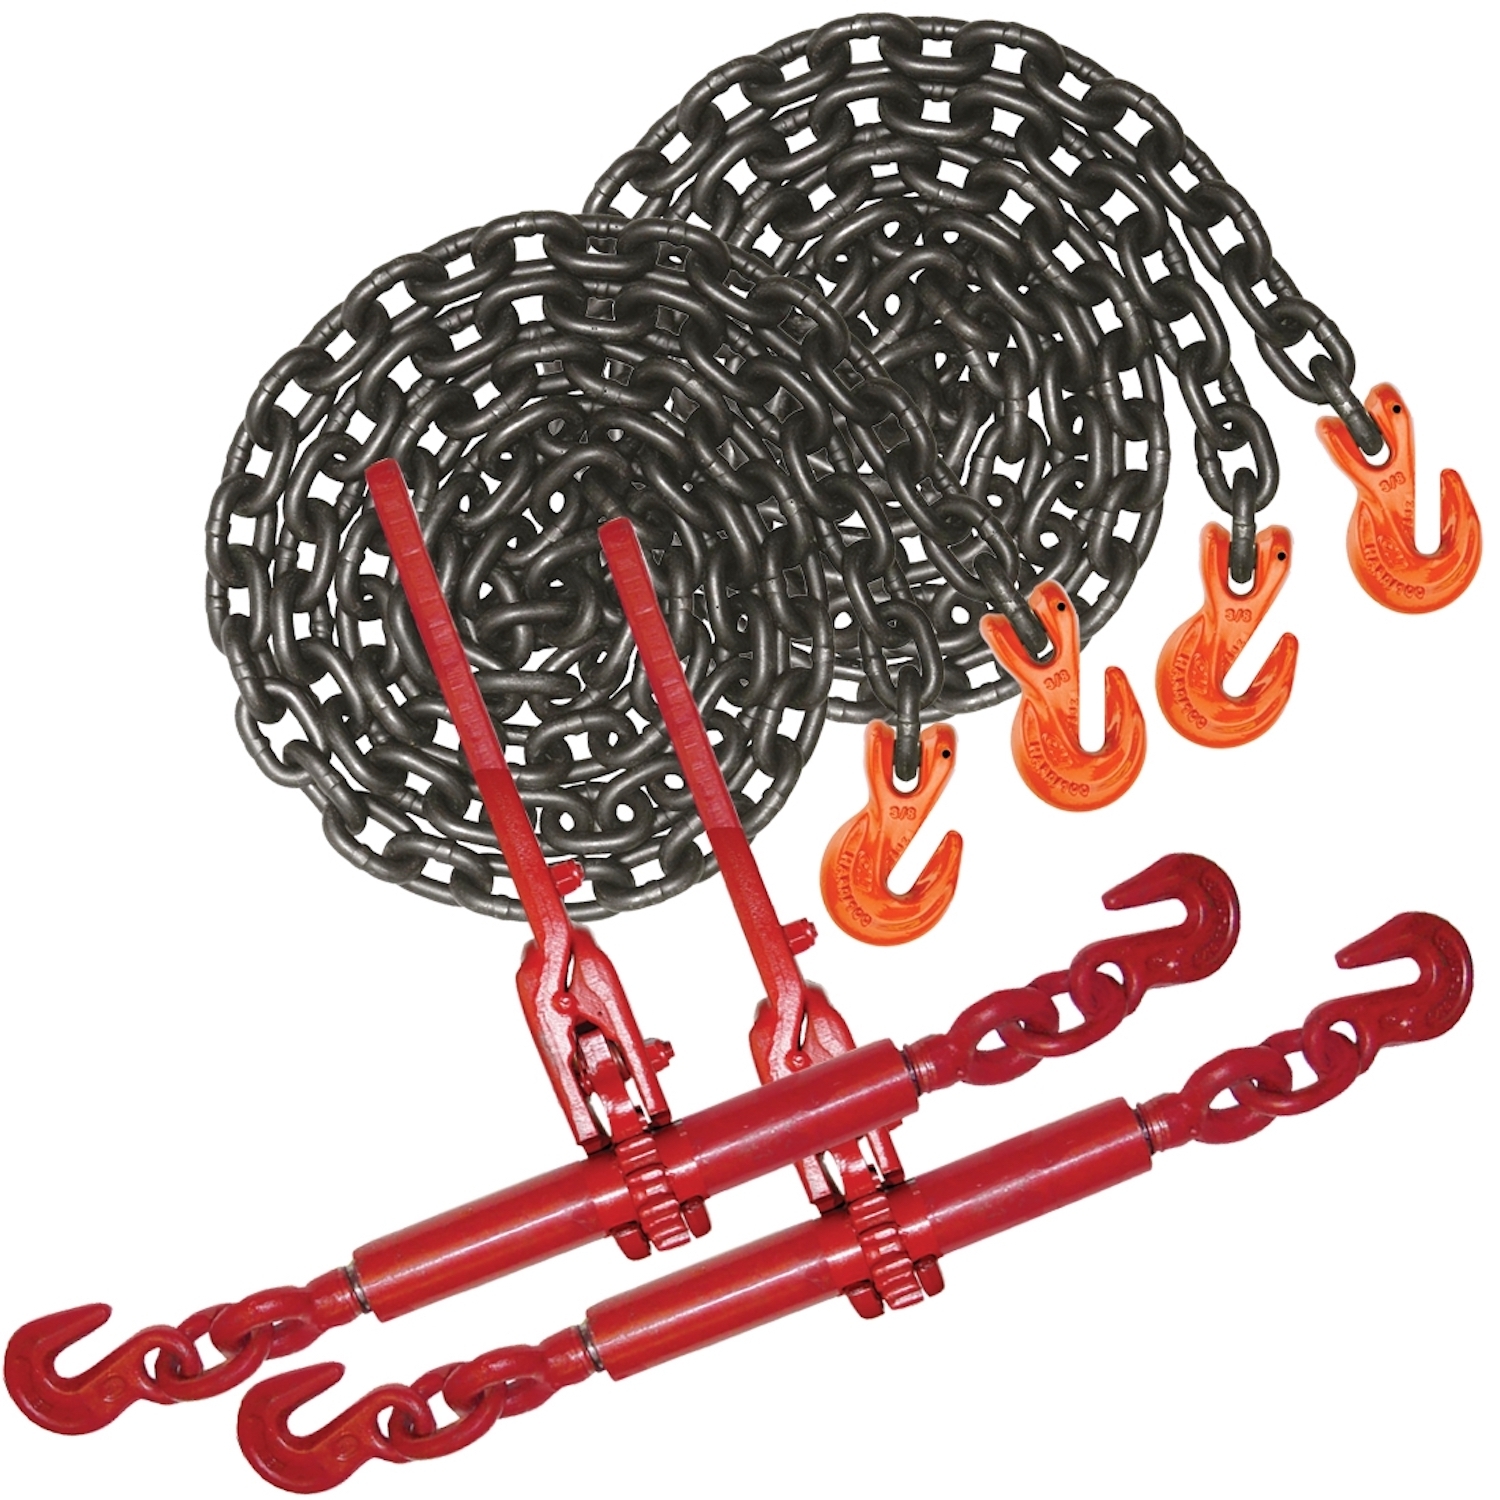 Grade 70-5//16 Inch x 10 Foot 4,700 Pound Safe Working Load VULCAN Chain and Load Binder Kit